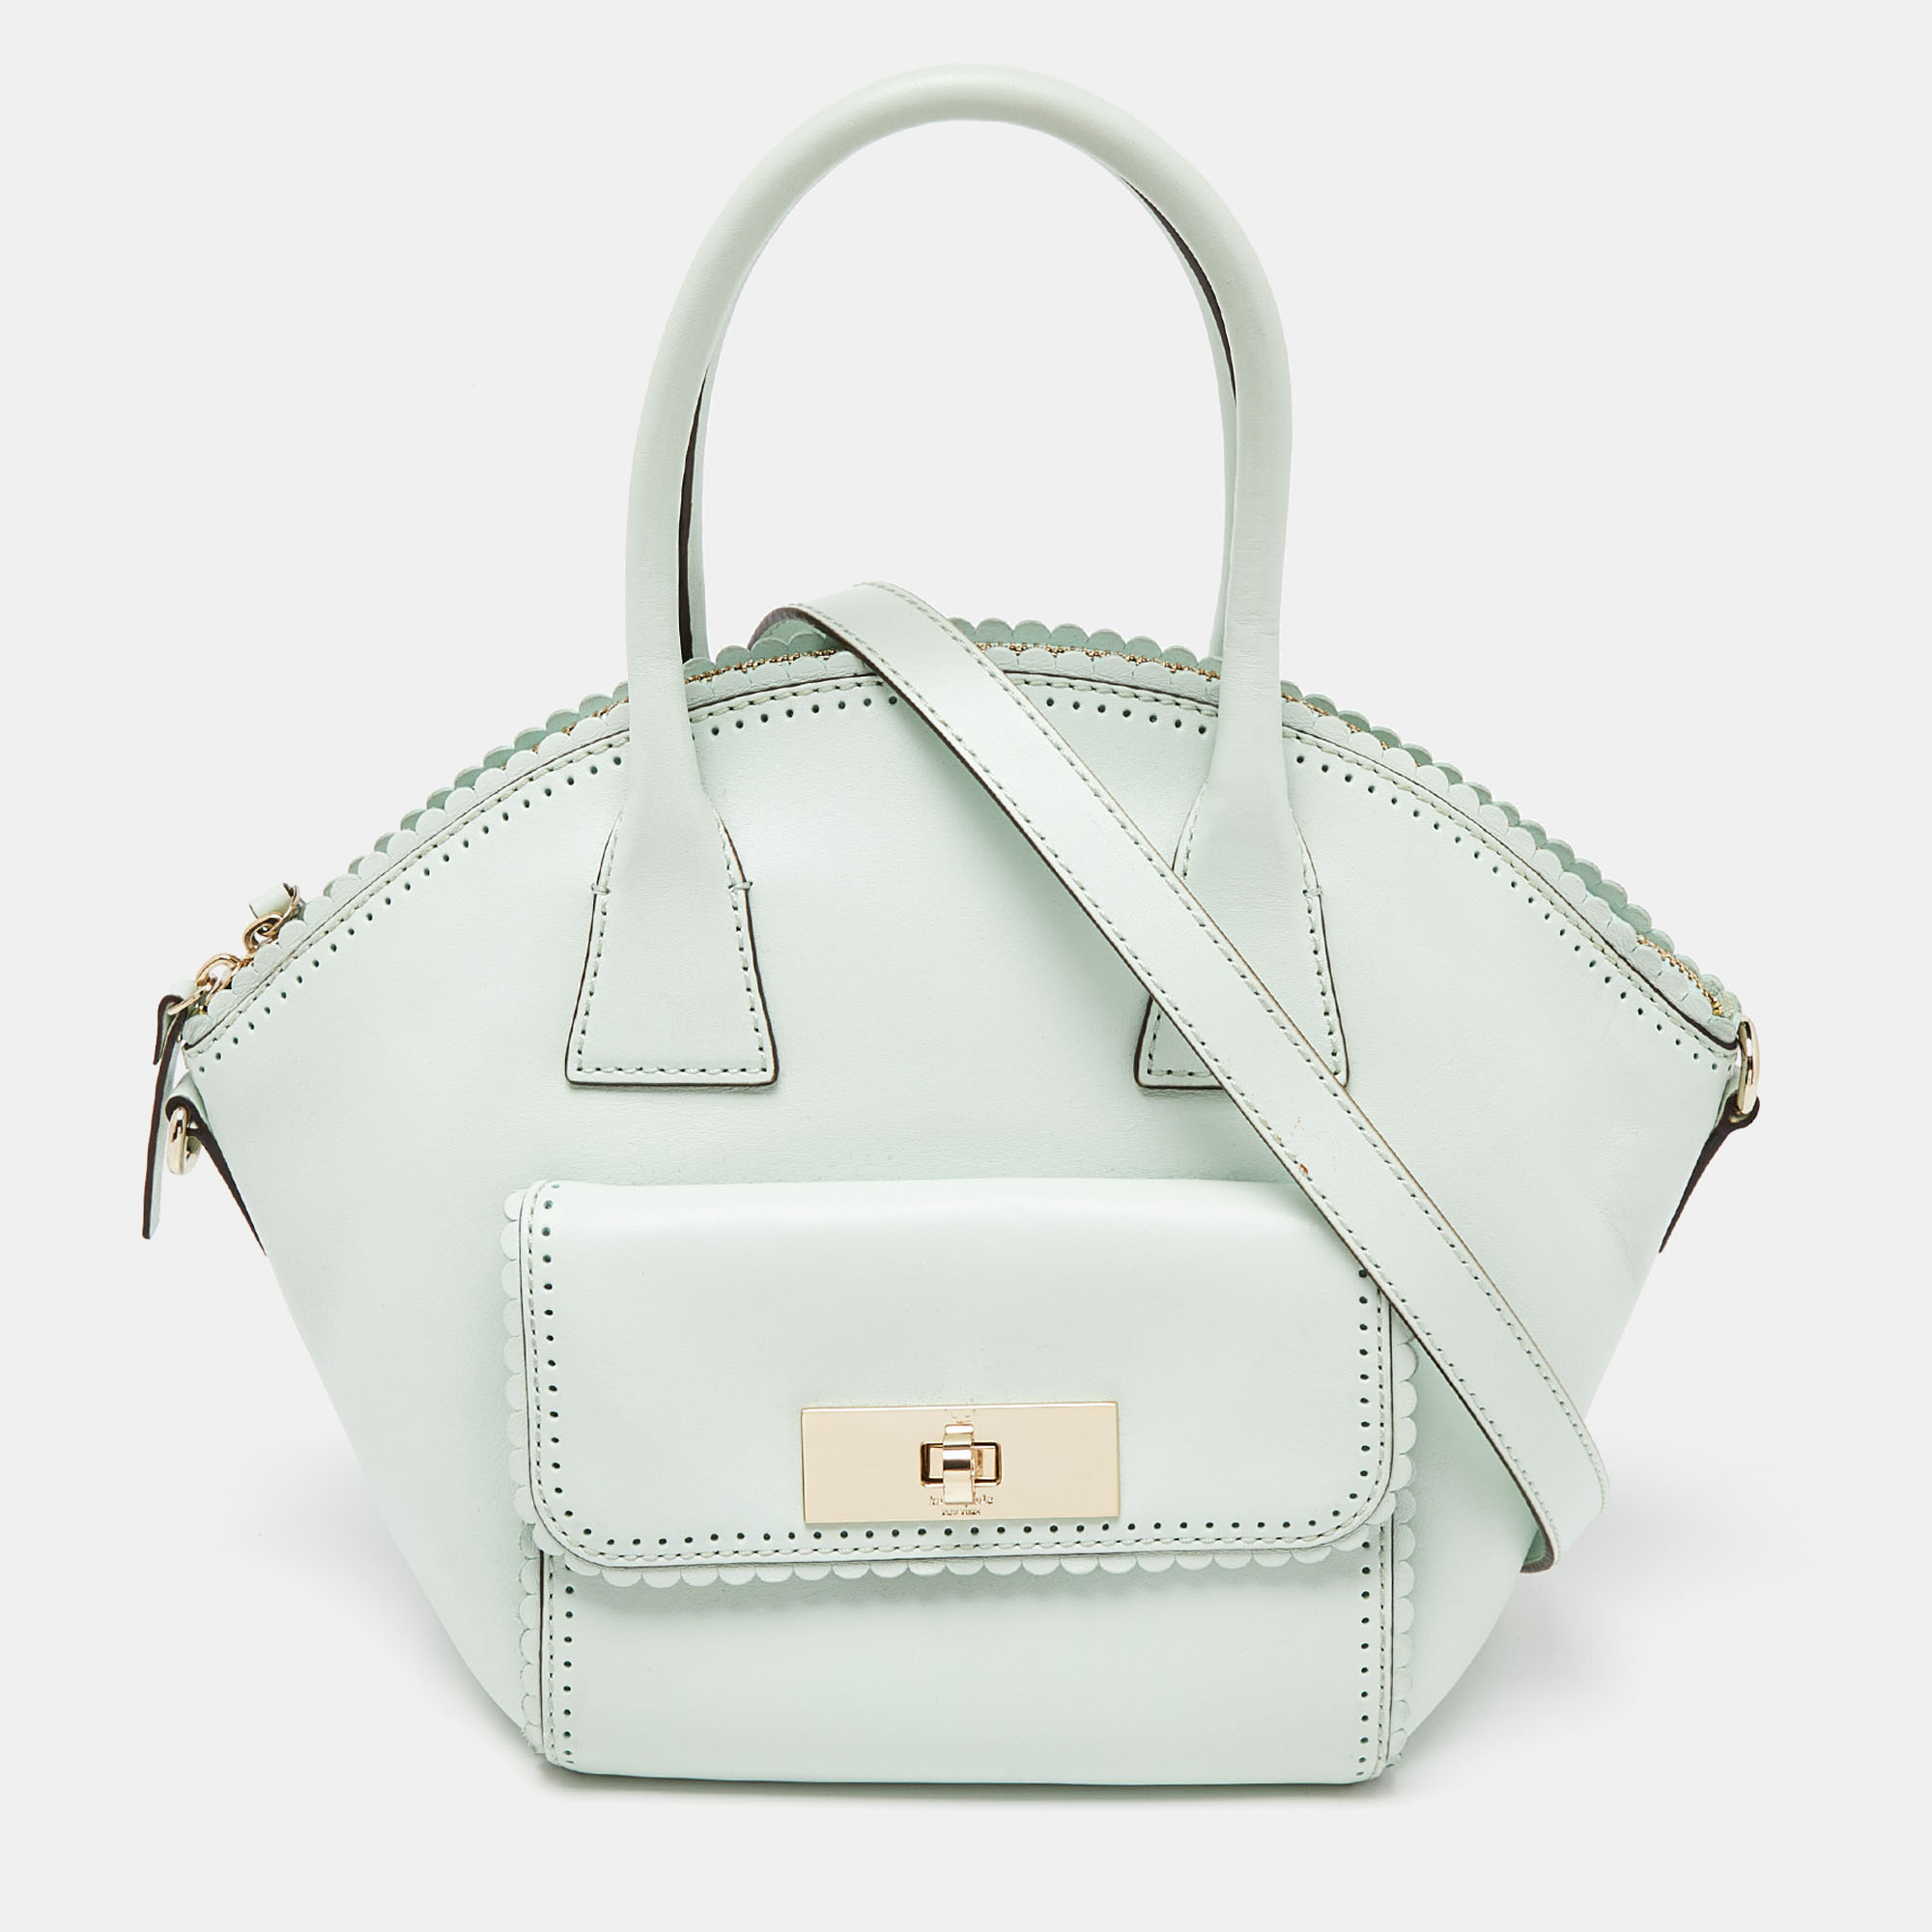 Kate Spade Mint Green Scalloped Leather Satchel